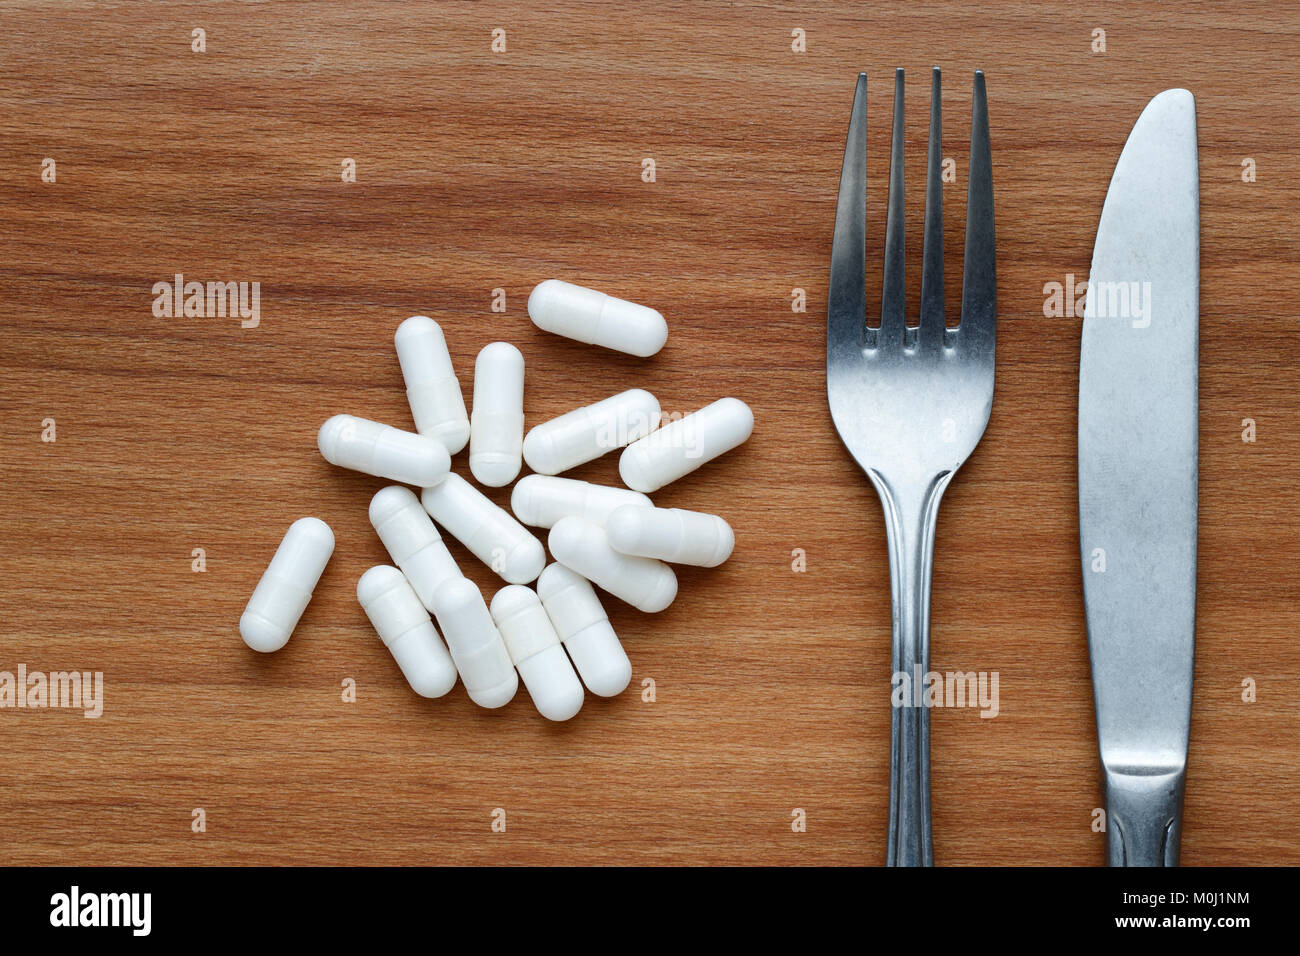 Diet concept with supplement pills, knife and fork Stock Photo